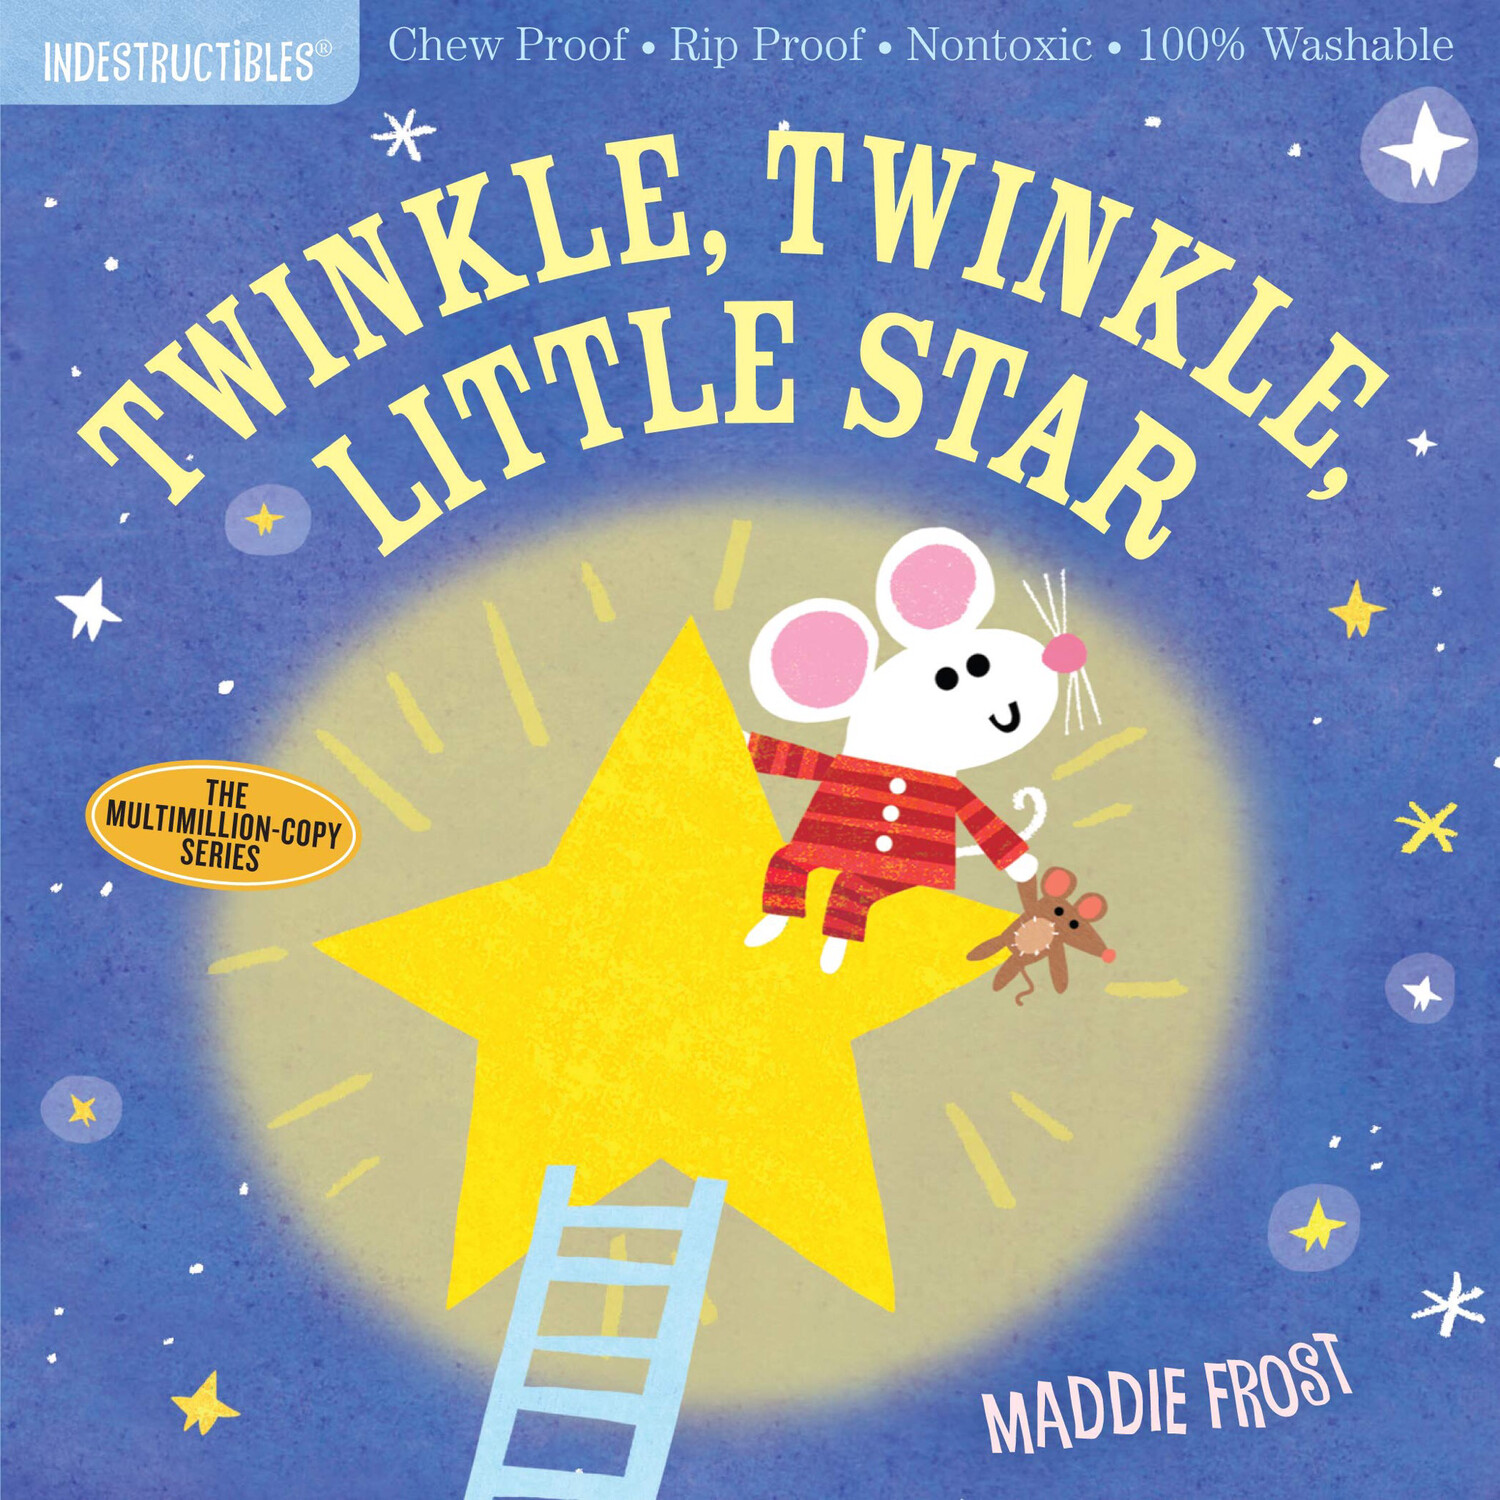 Indestructibles “Twinkle Twinkle Little Star” Book